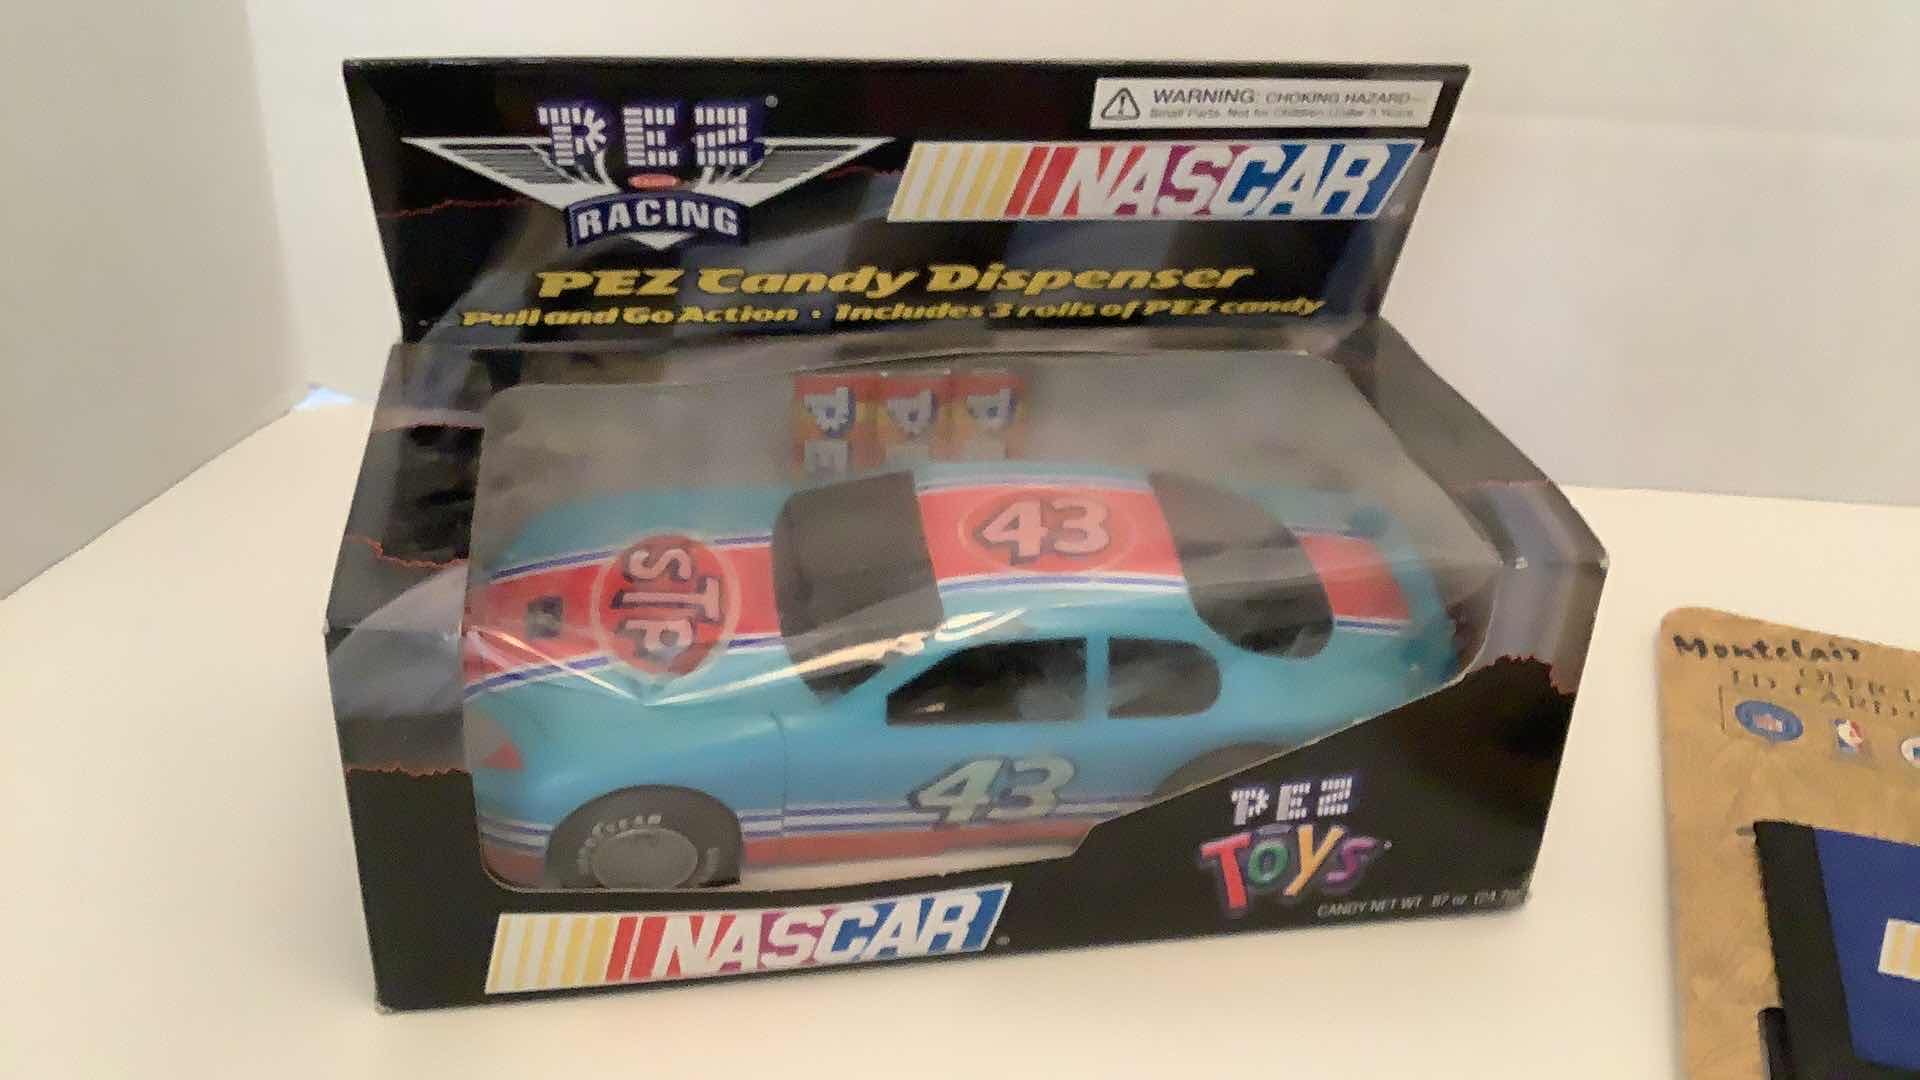 Photo 3 of NASCAR #43 PEZ CANDY DISPENSER AND CARD CASE